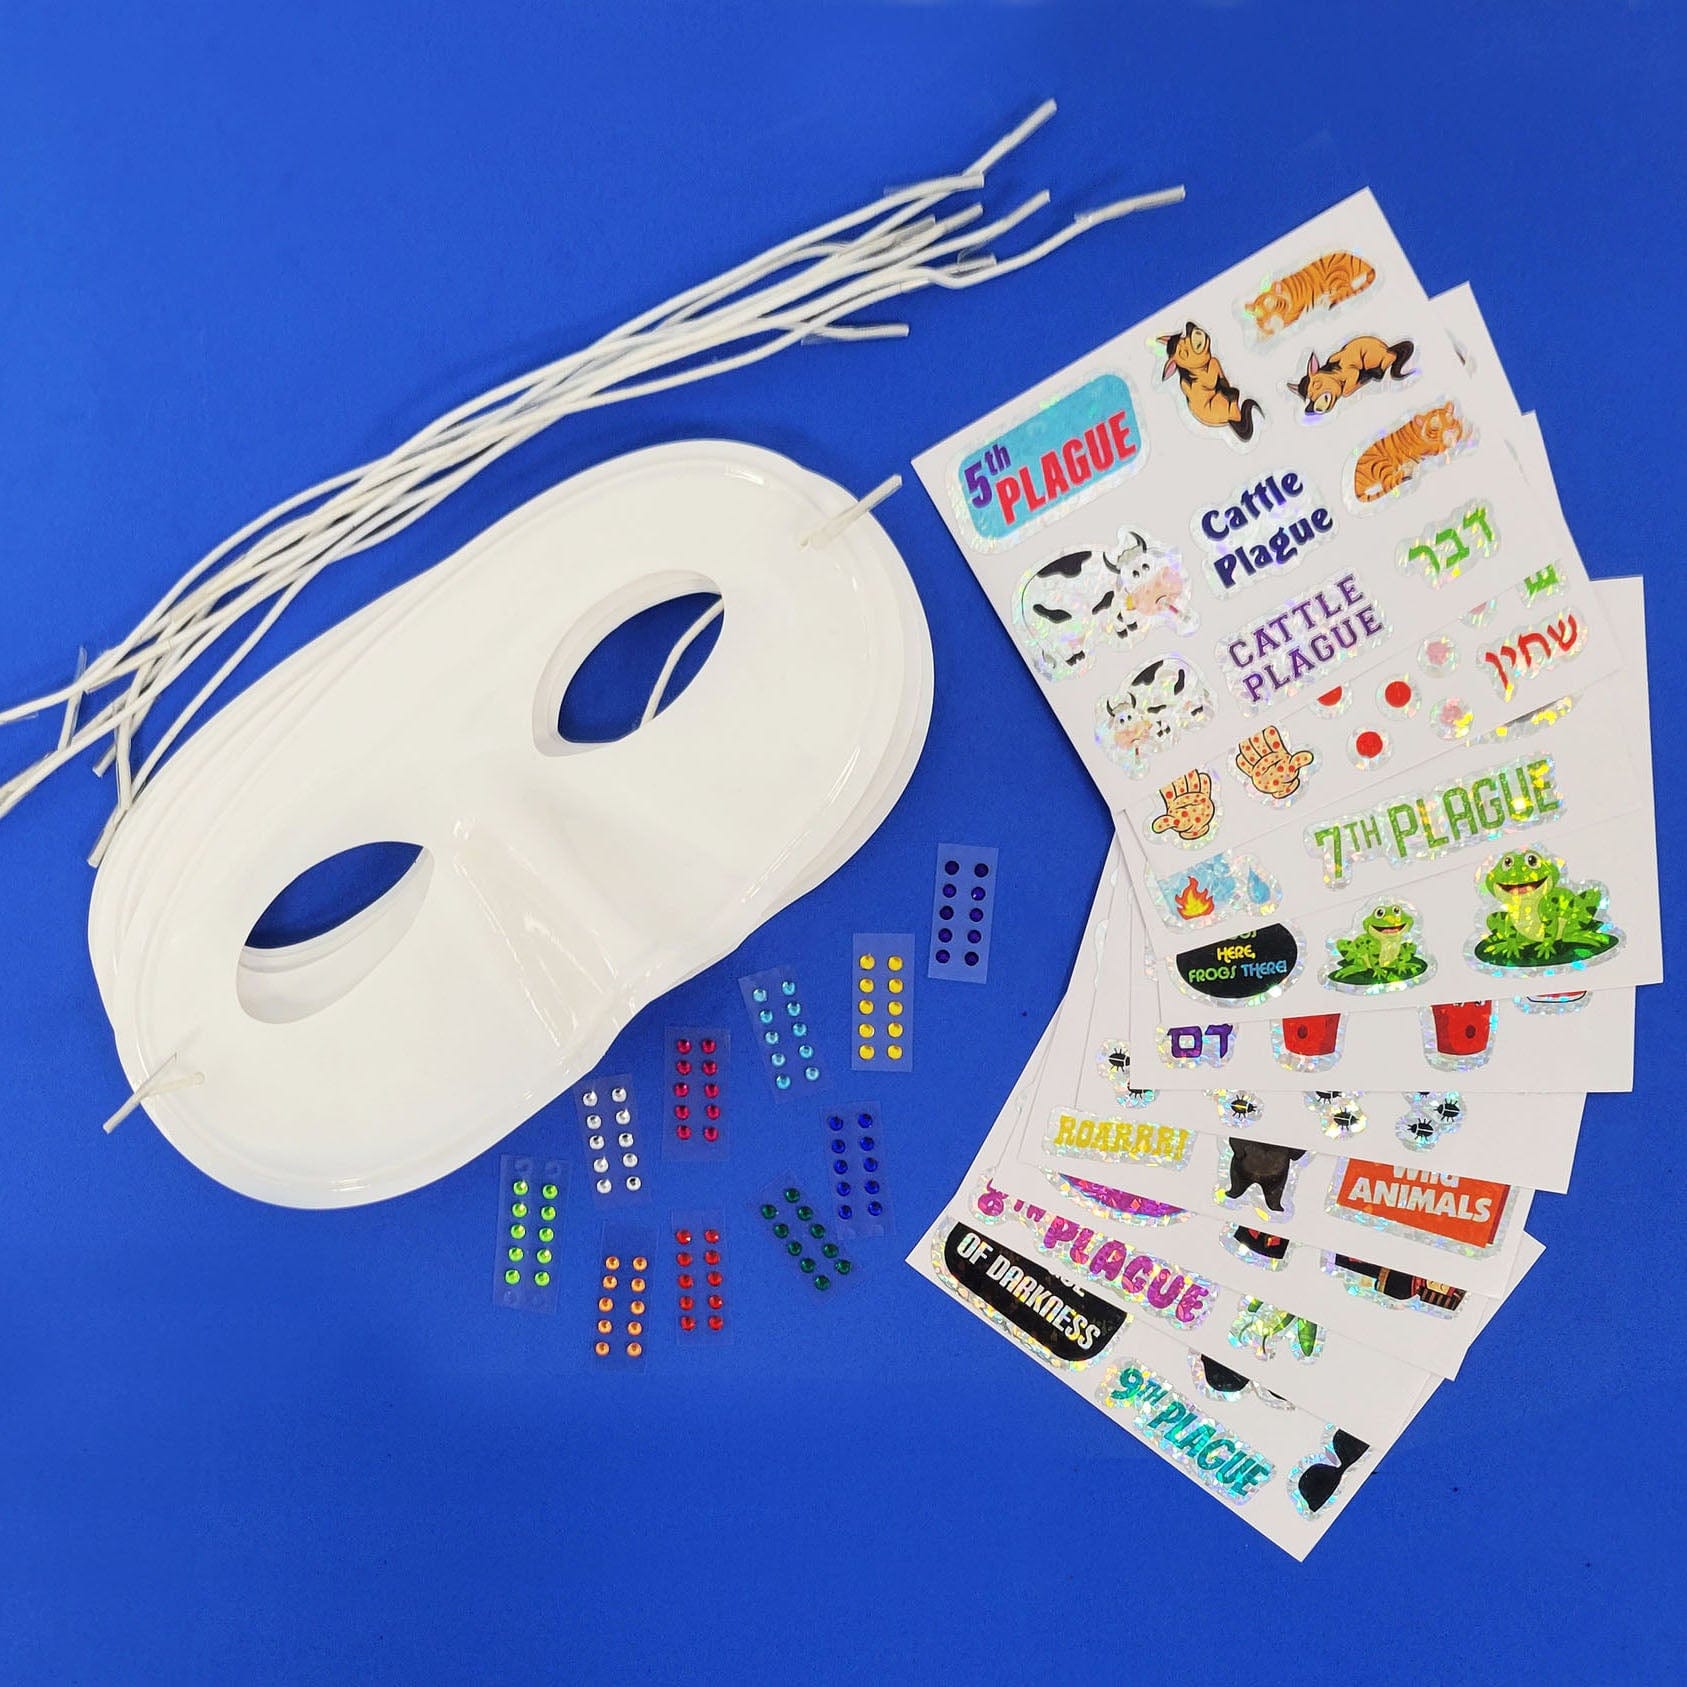 Rite Lite Games Decorate Your Own 10 Plagues Masks